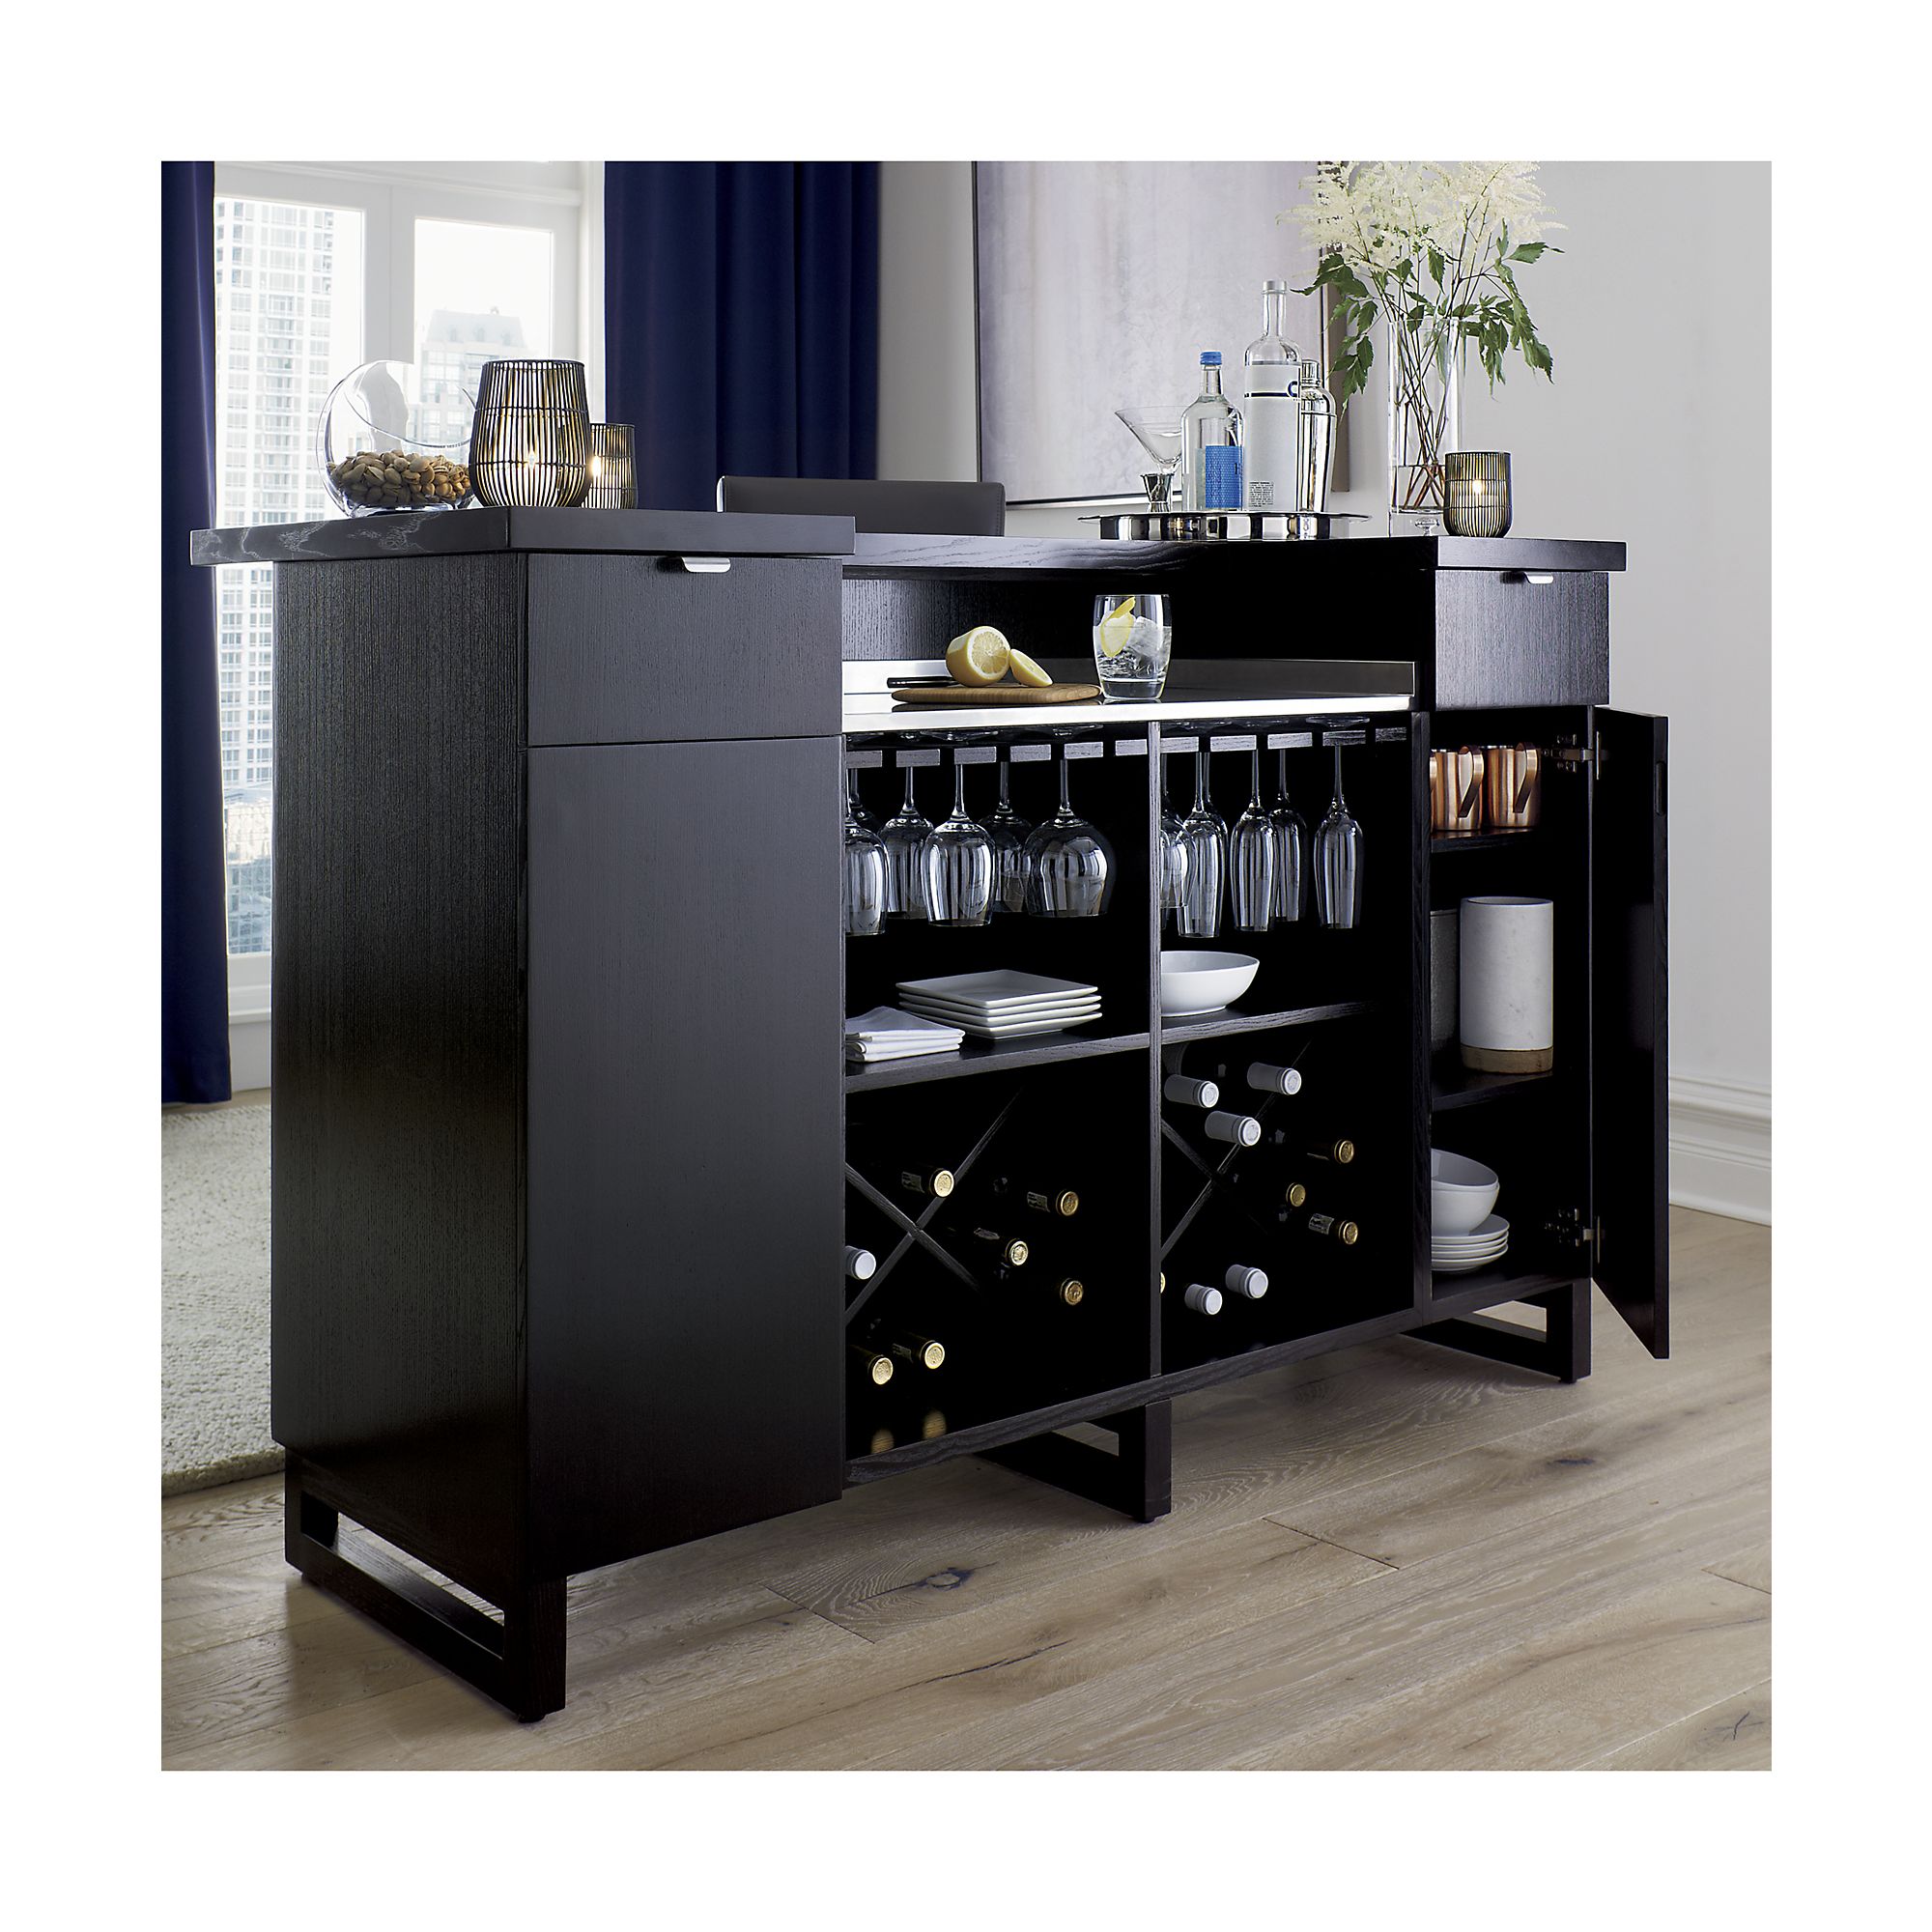 steamer-standing-home-bar-cabinet-with-stainless-steel-top (1)